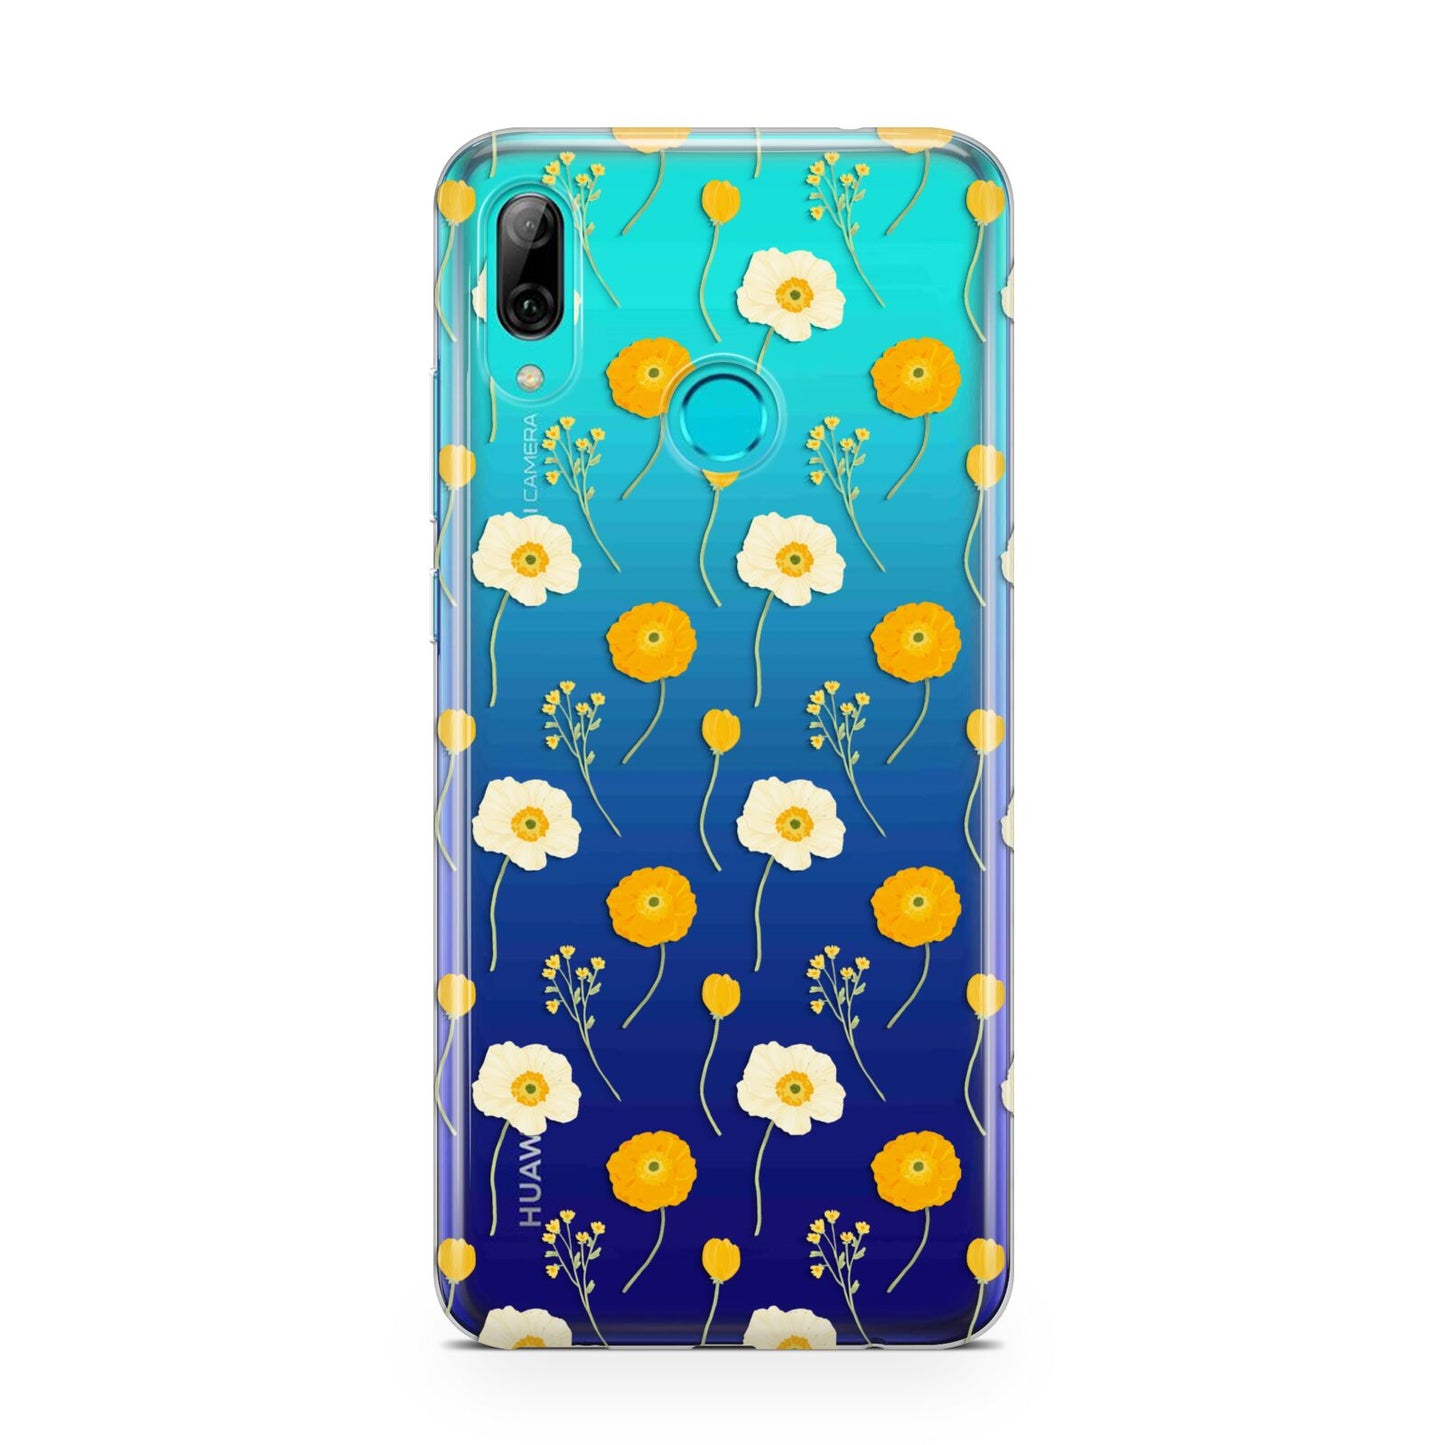 Wild Floral Huawei P Smart 2019 Case